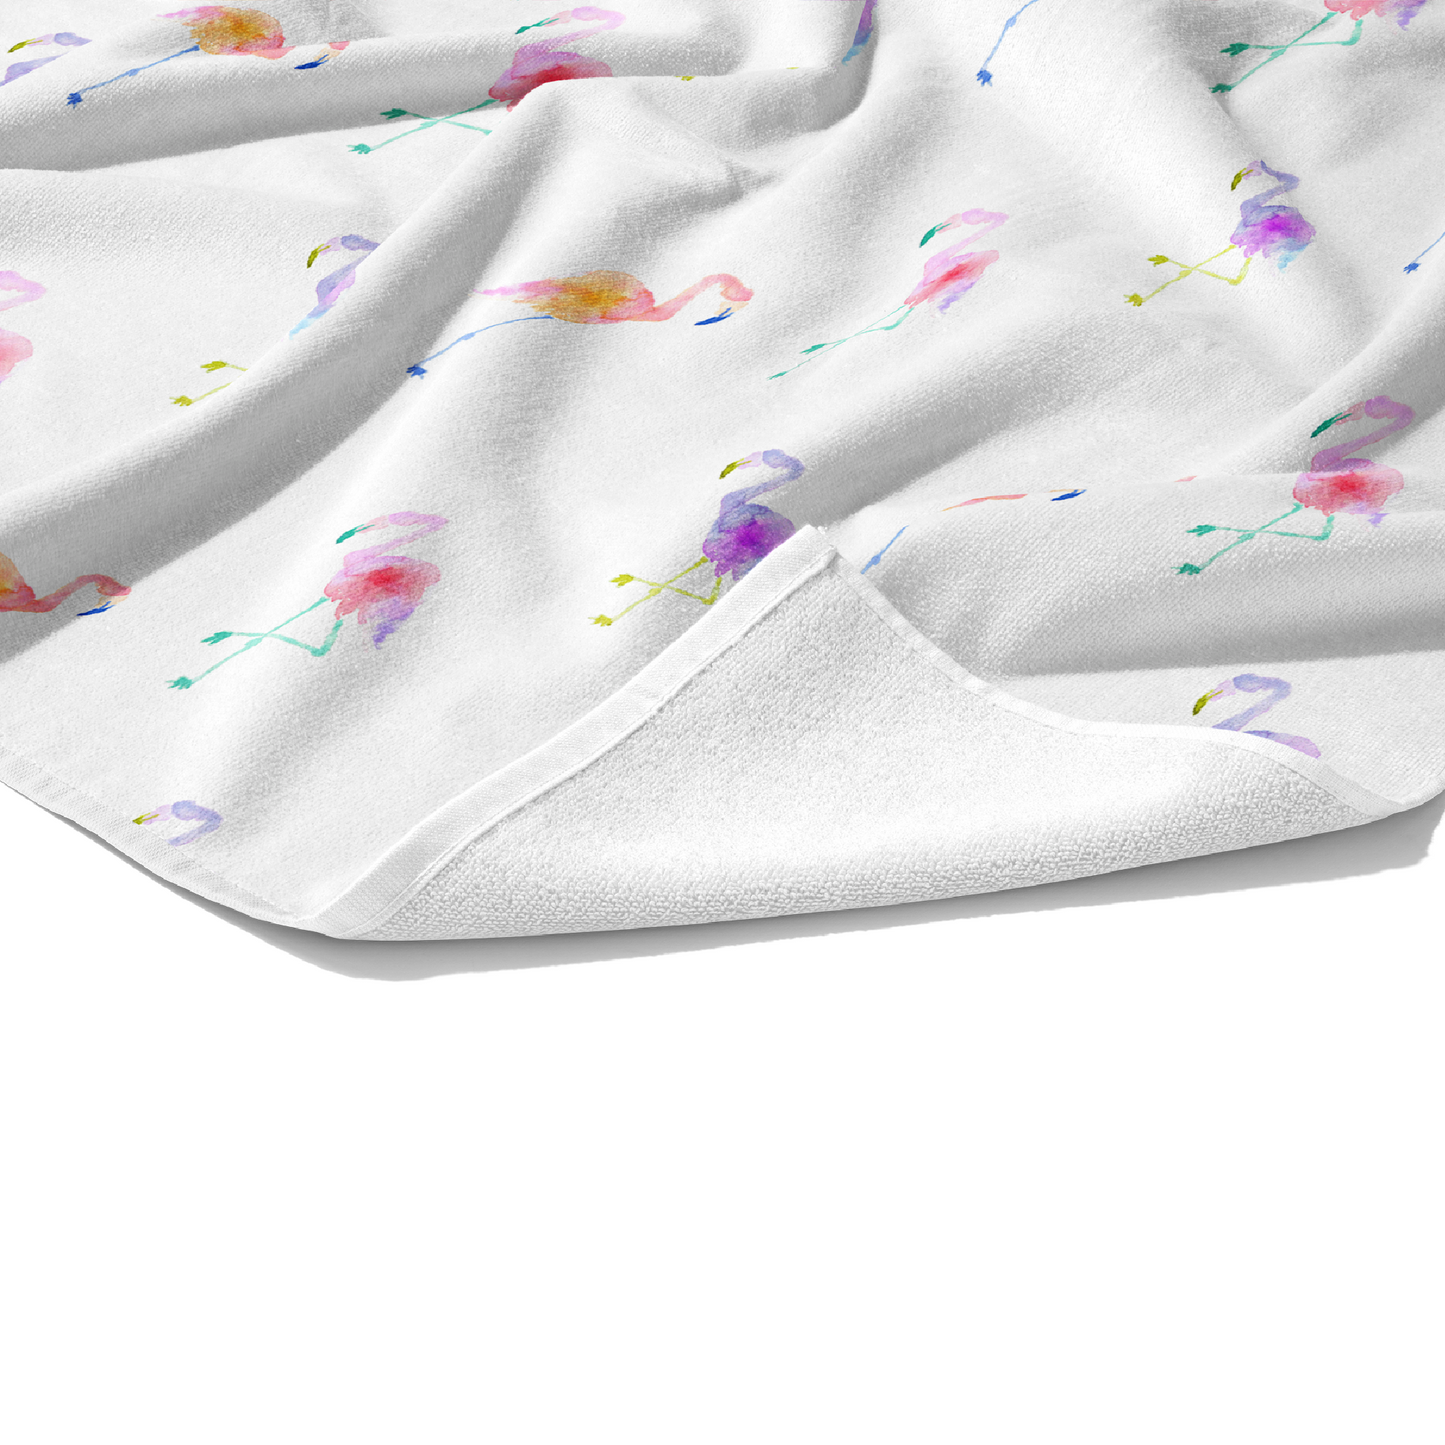 Plush white cotton towel with bright purple, pink, orange, yellow. and green tropical flamingos on white print on the front.